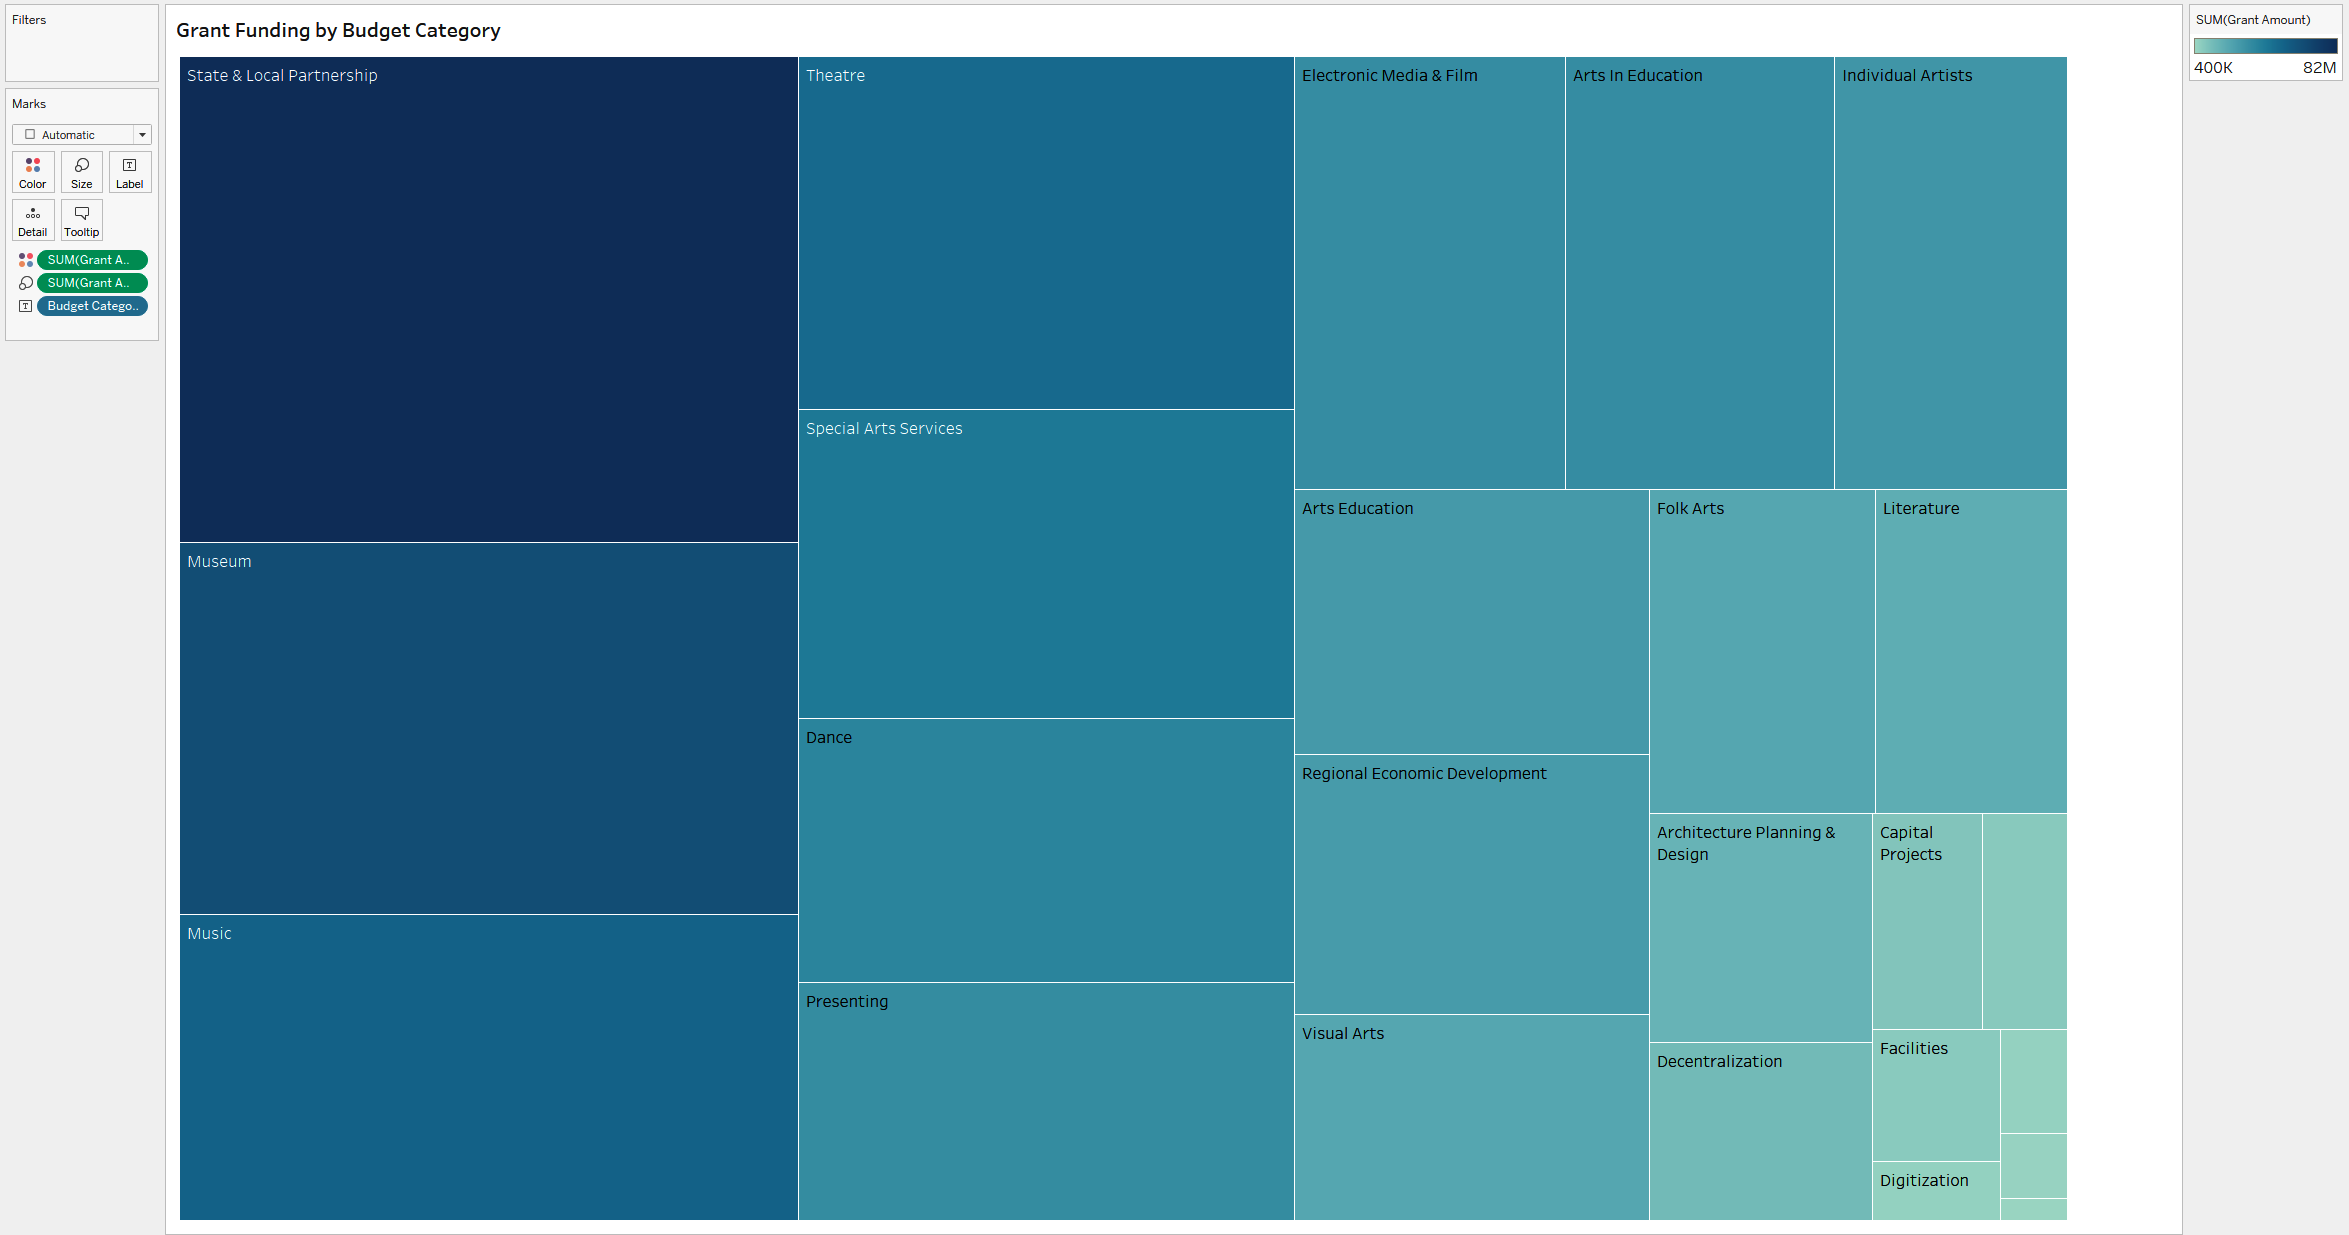 A treemap showing the budget categories ordered by grant amount